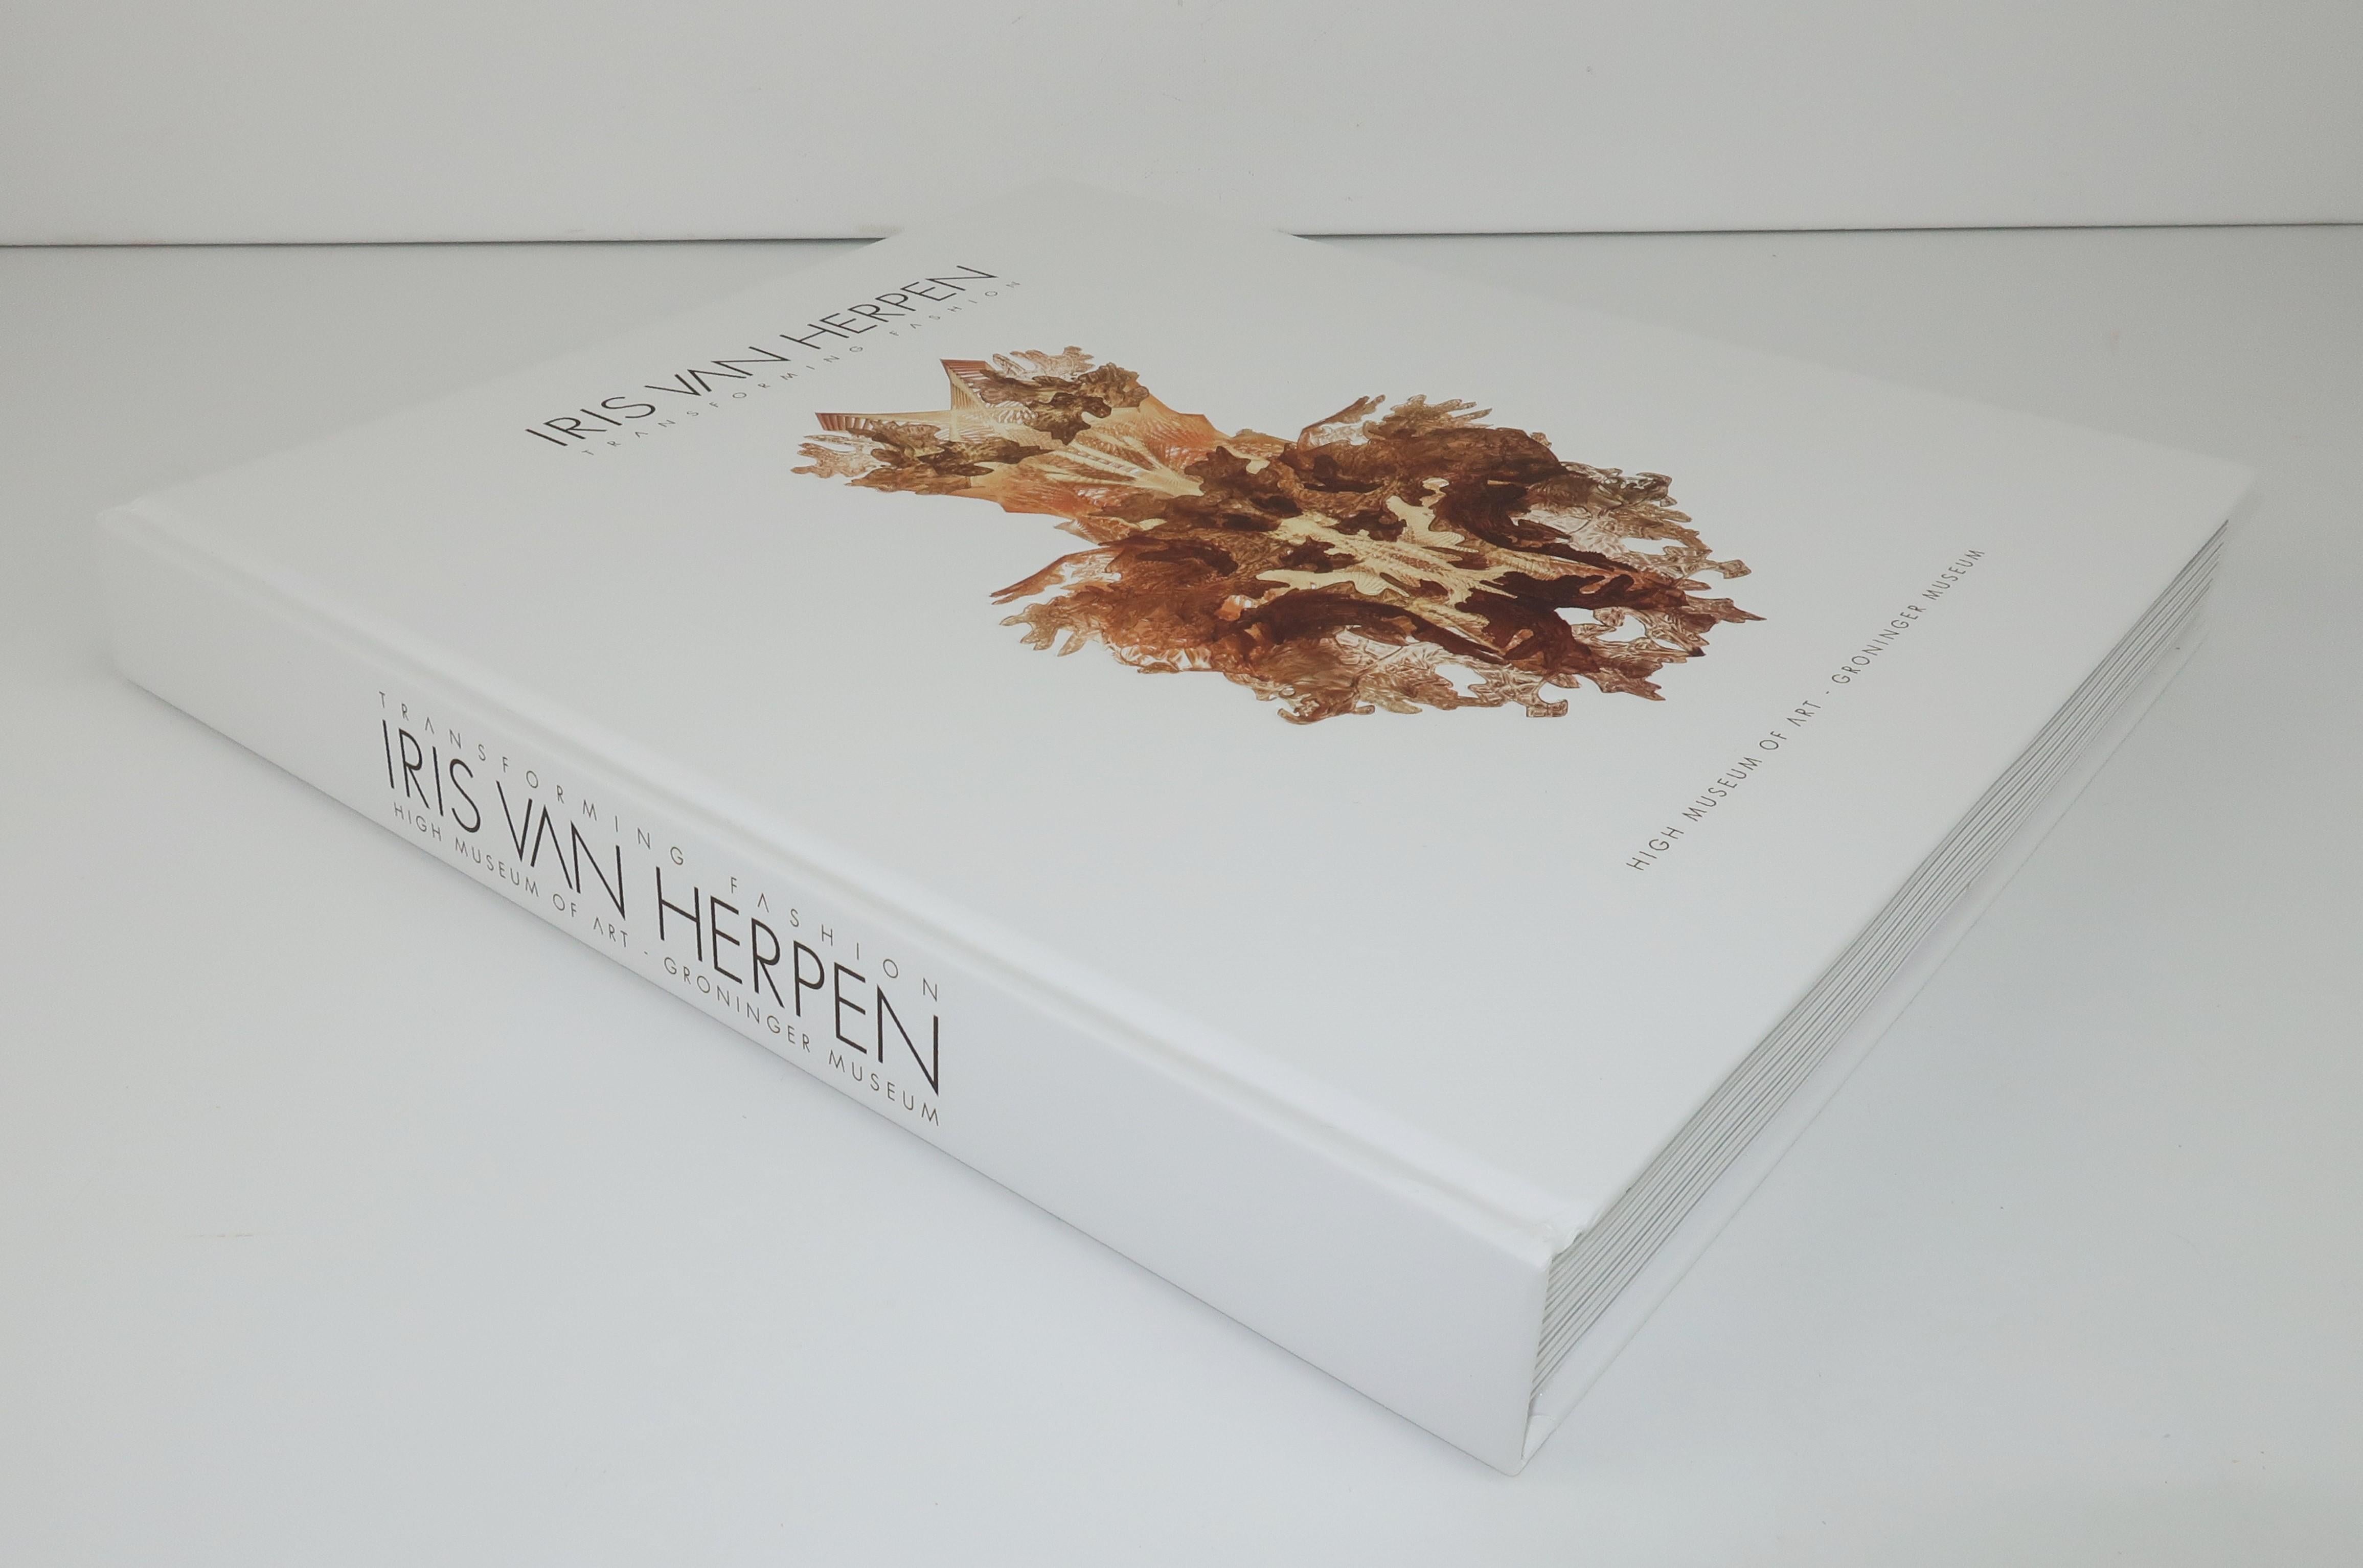 Welcome to the fascinating world of Dutch fashion designer, Iris Van Herpen.  This 392 page hardbound book entitled 'Transforming Fashion' was published in 2015 by The Groninger Museum and Atlanta's High Museum of Art to commemorate an exhibit of